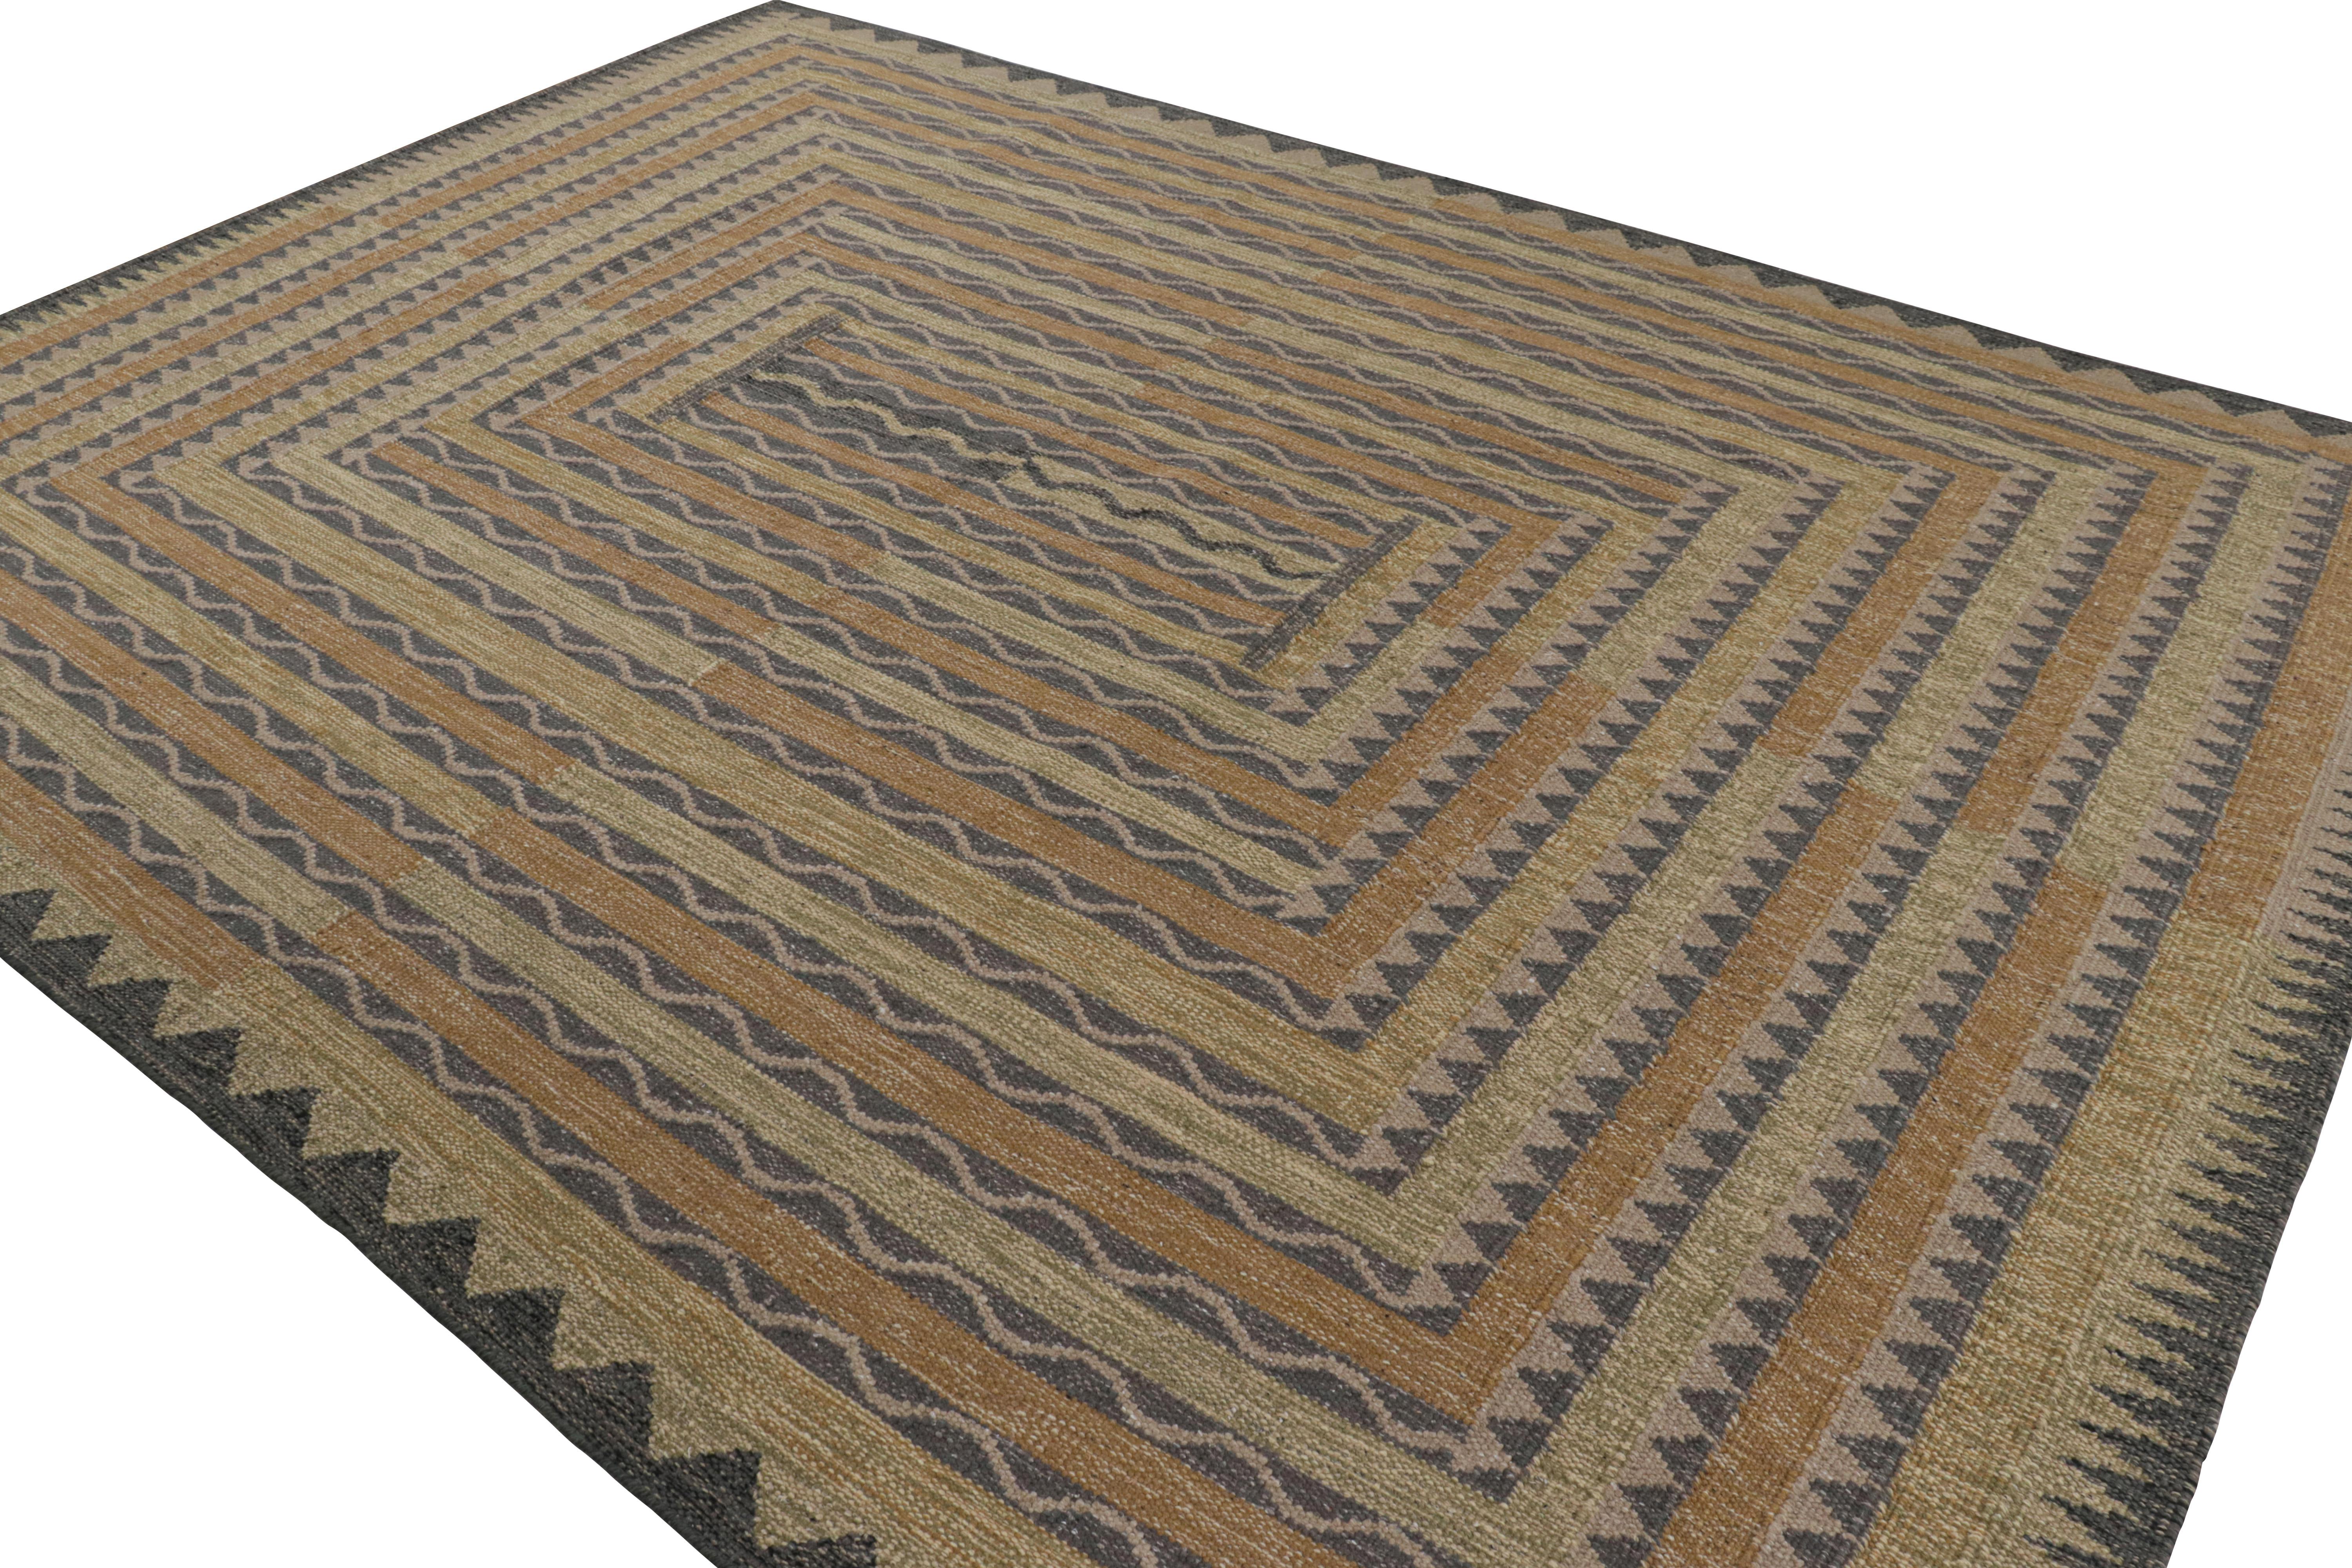 Indian Rug & Kilim’s Scandinavian Style Rug with Polychromatic Geometric Patterns For Sale